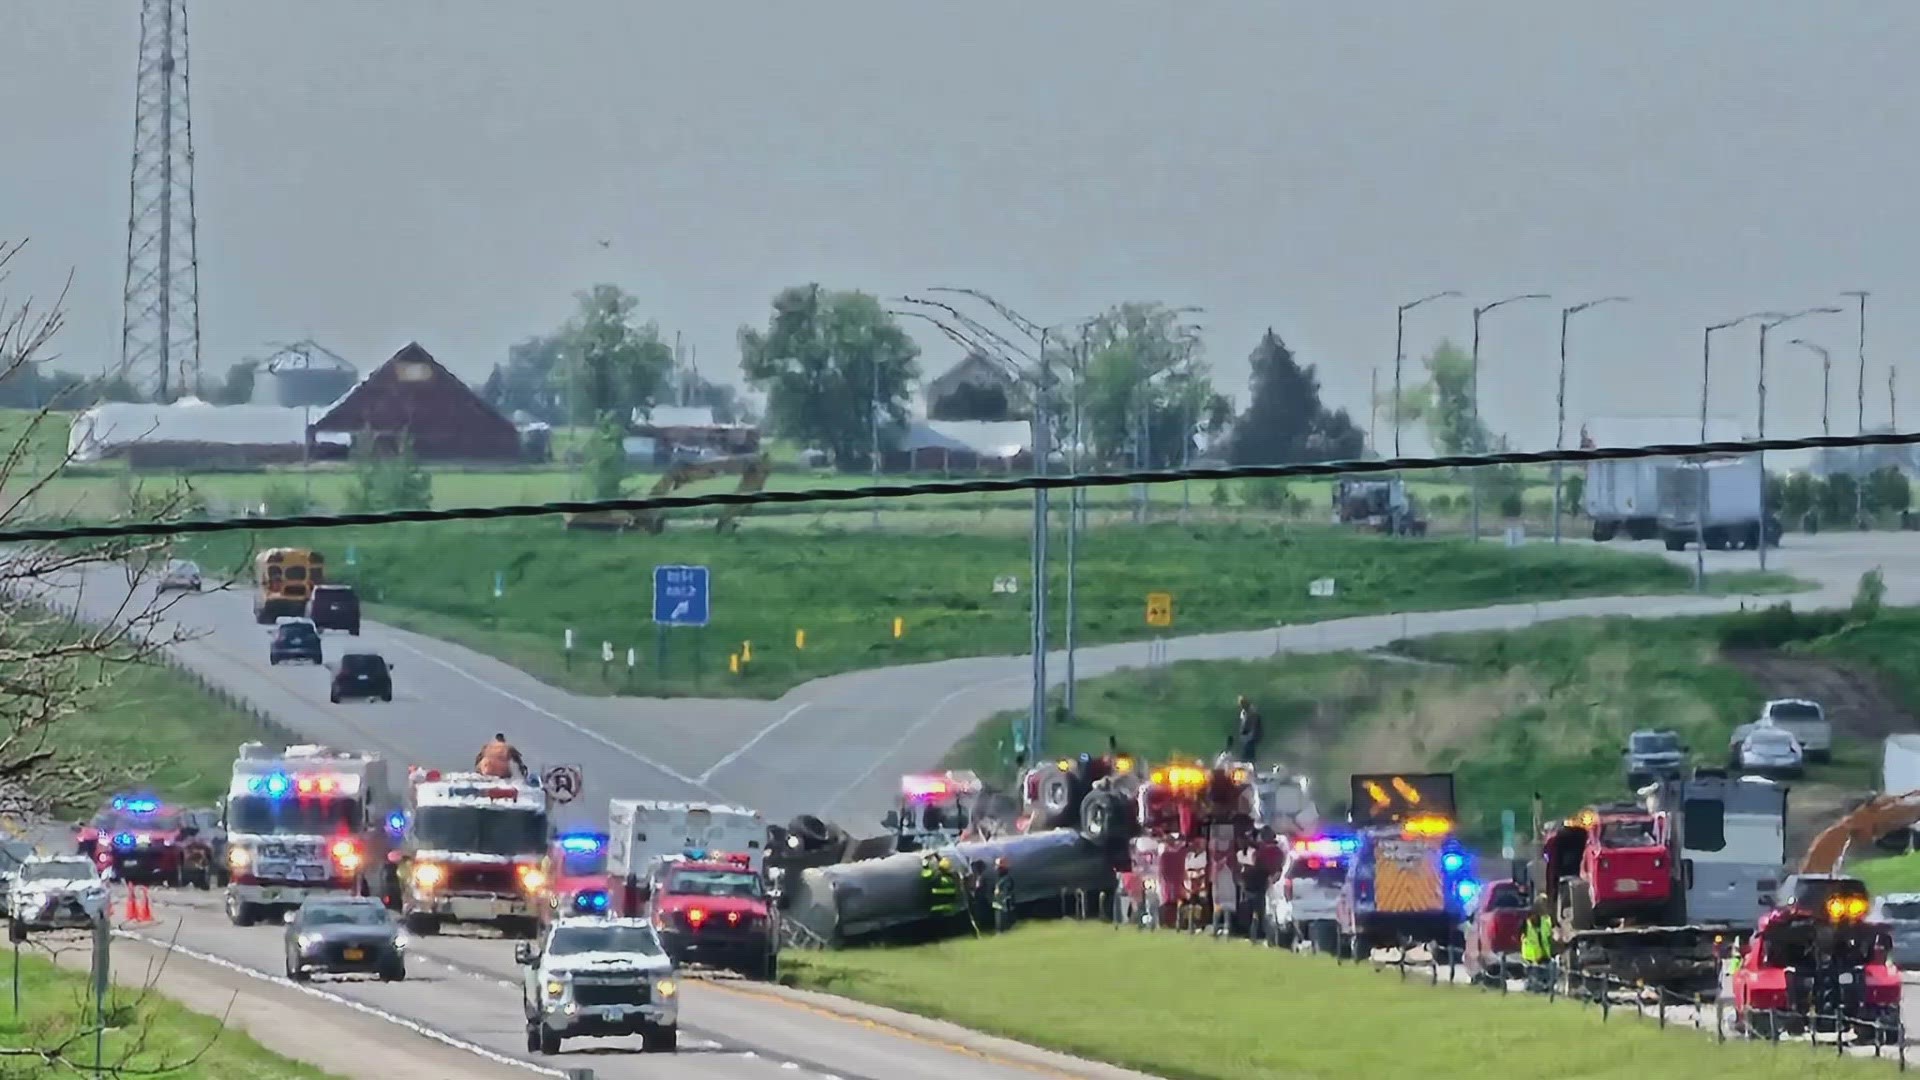 The crash, which led to the tanker rolling onto its side, happened around 9 a.m. Thursday near 158th Avenue on I-35 northbound.